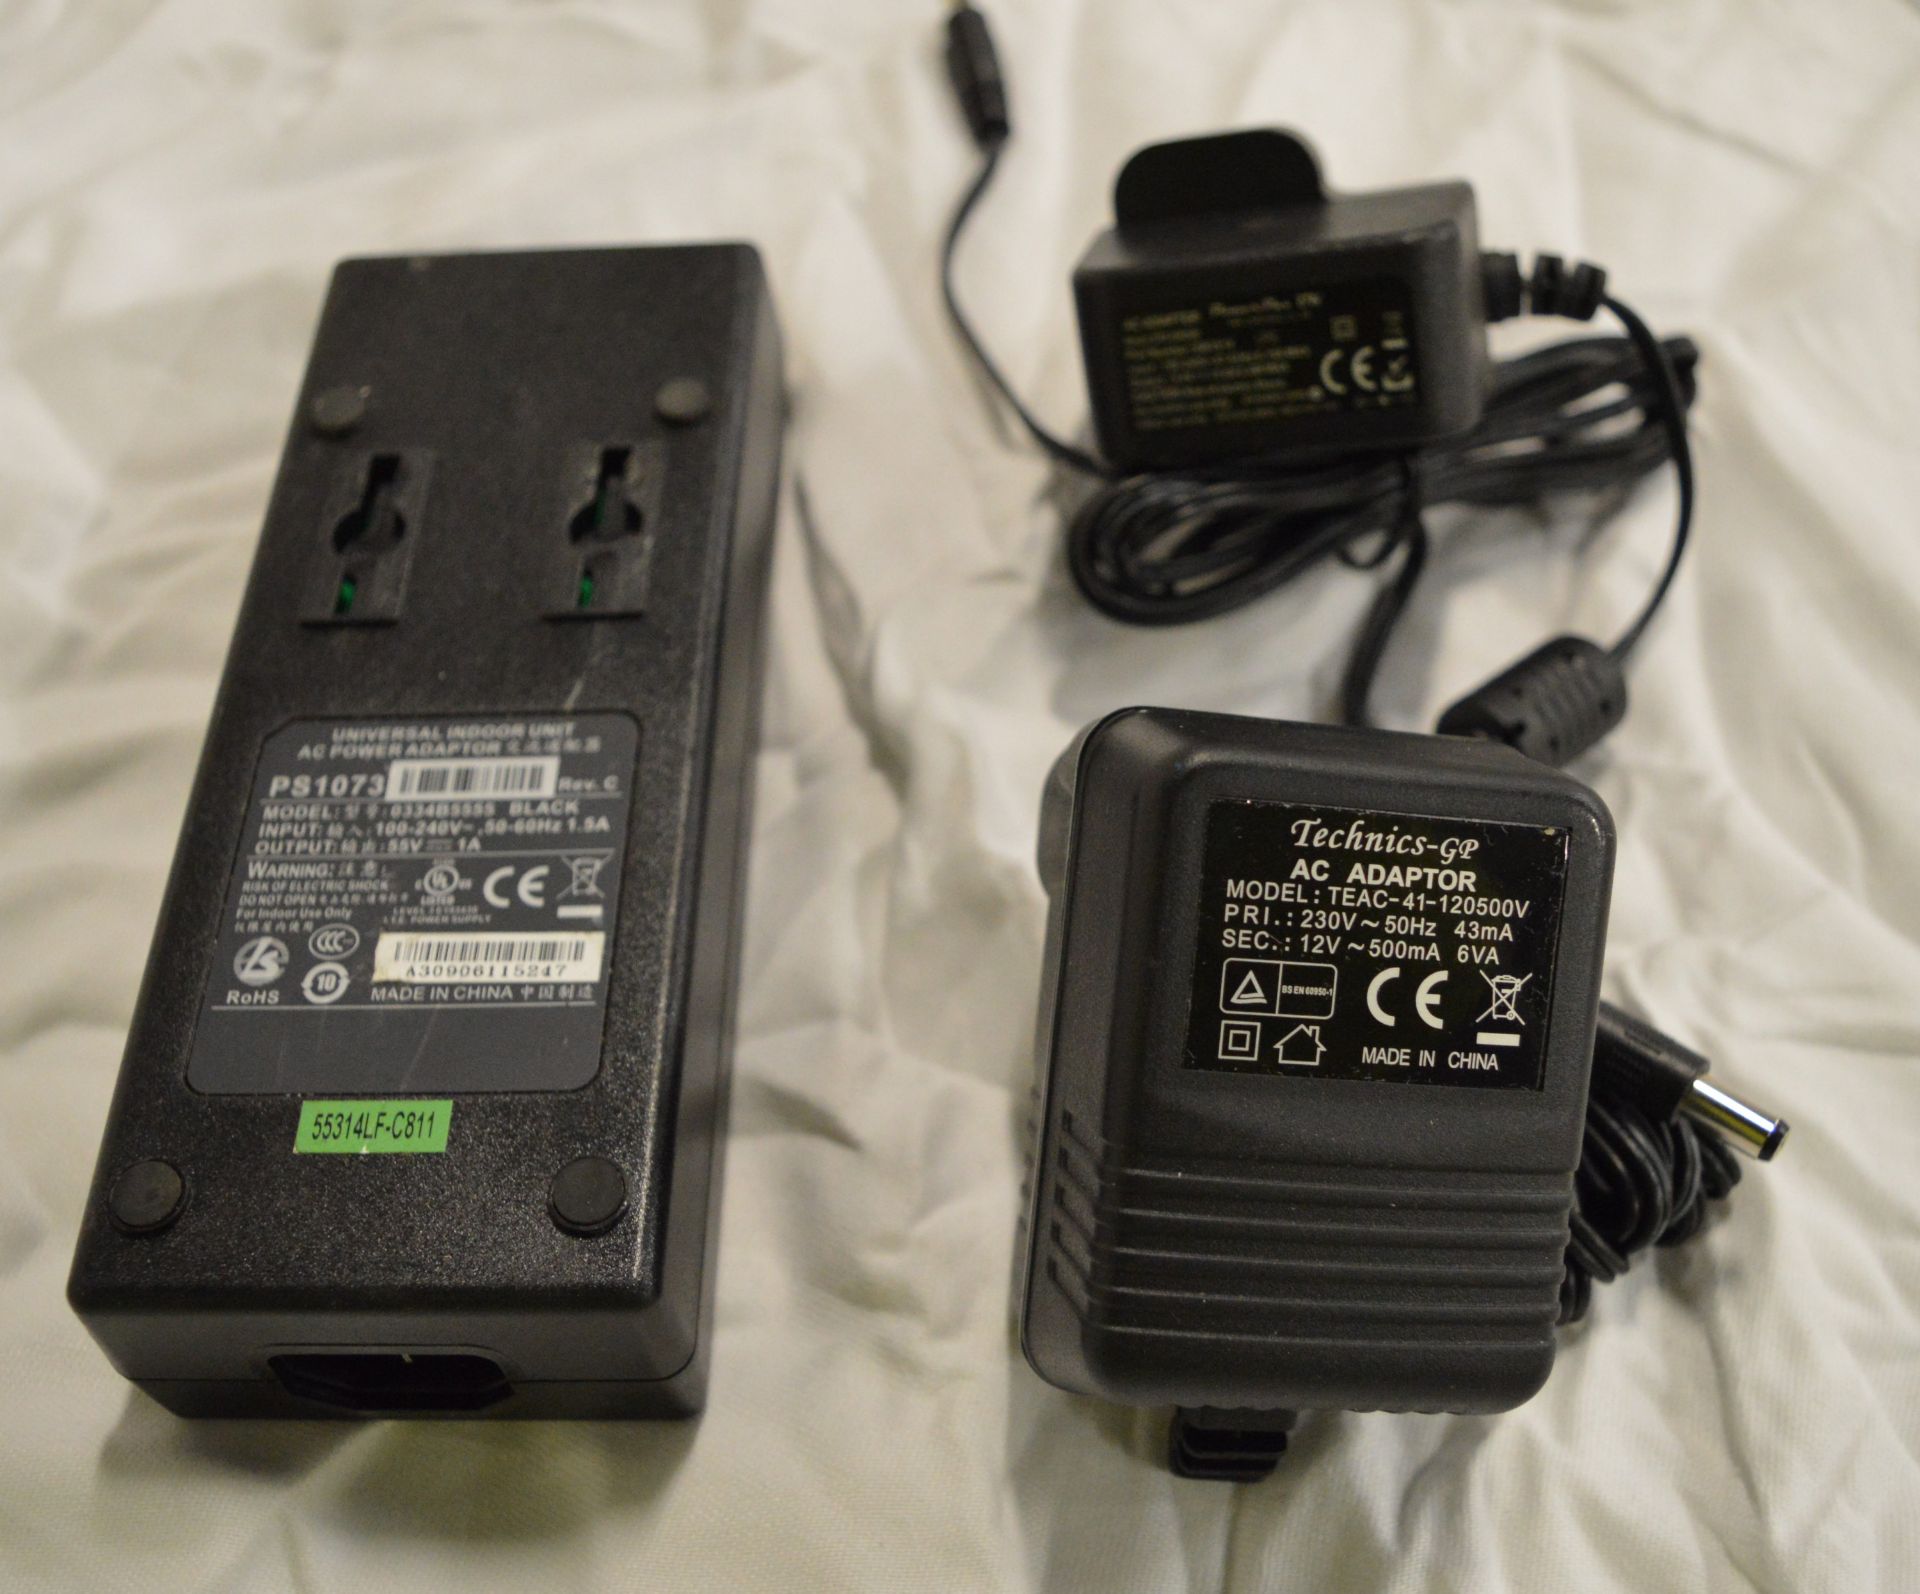 9x Power Adaptor 55V, Approx 80x Power Adaptor Low Voltage, 2x Rack Mounted Power Sockets. - Image 2 of 2